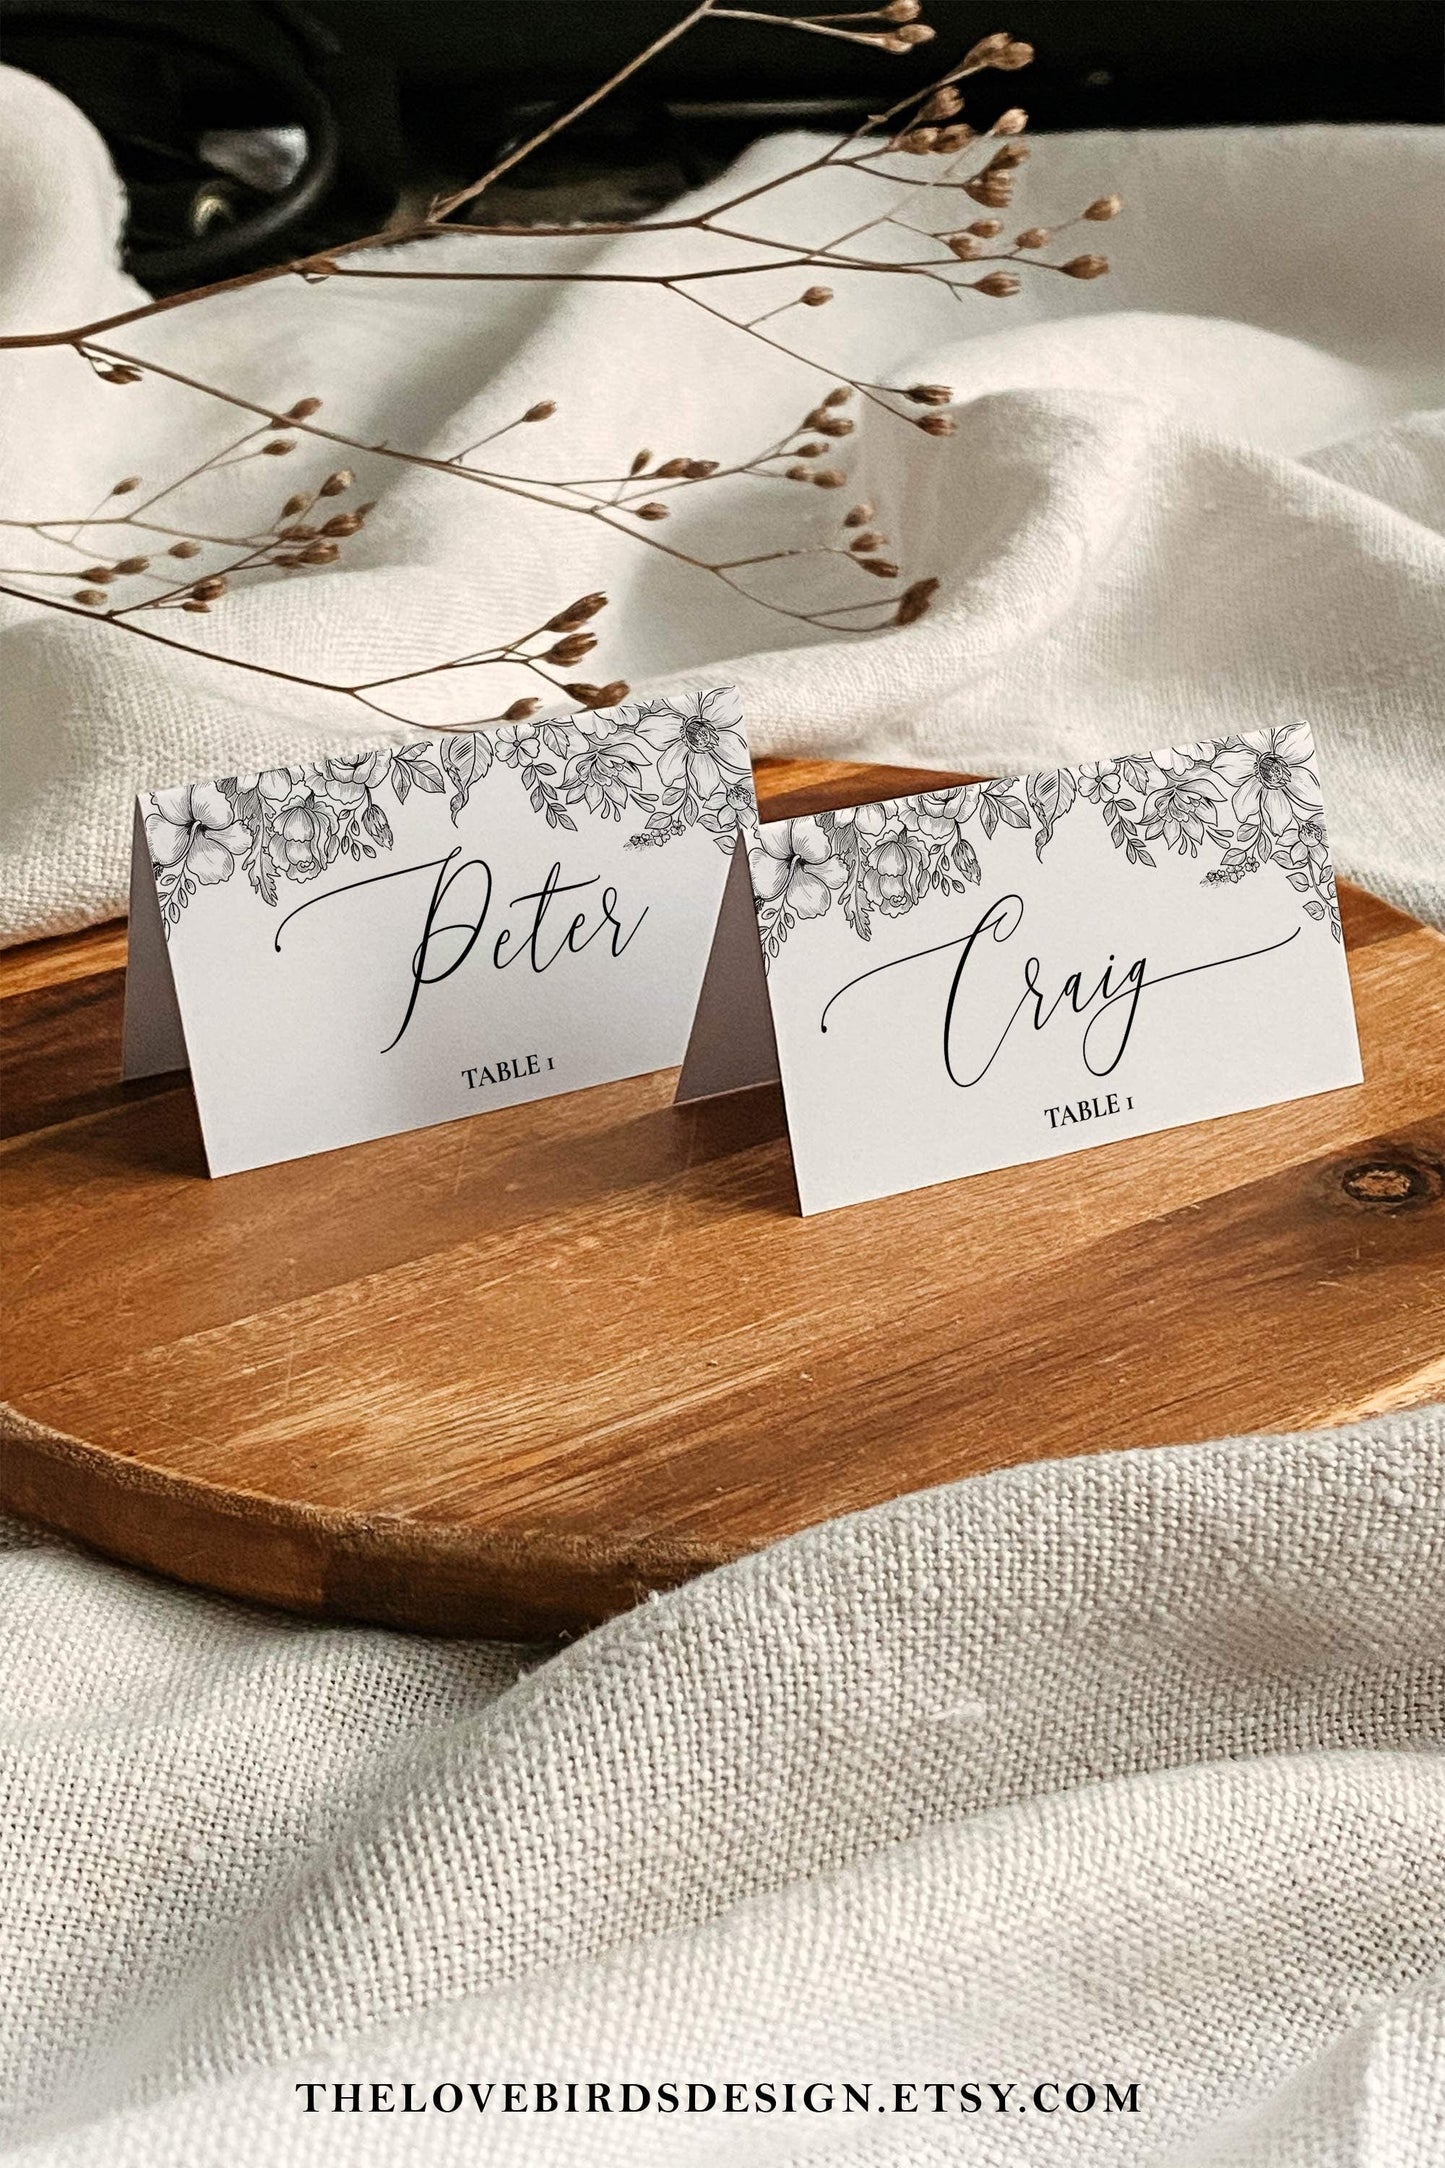 Black Rose Gothic Place Card for Tattoo Rock n Roll Wedding Bridal Shower Birthday or Funeral, Till Death Do Us Party Name Card Table